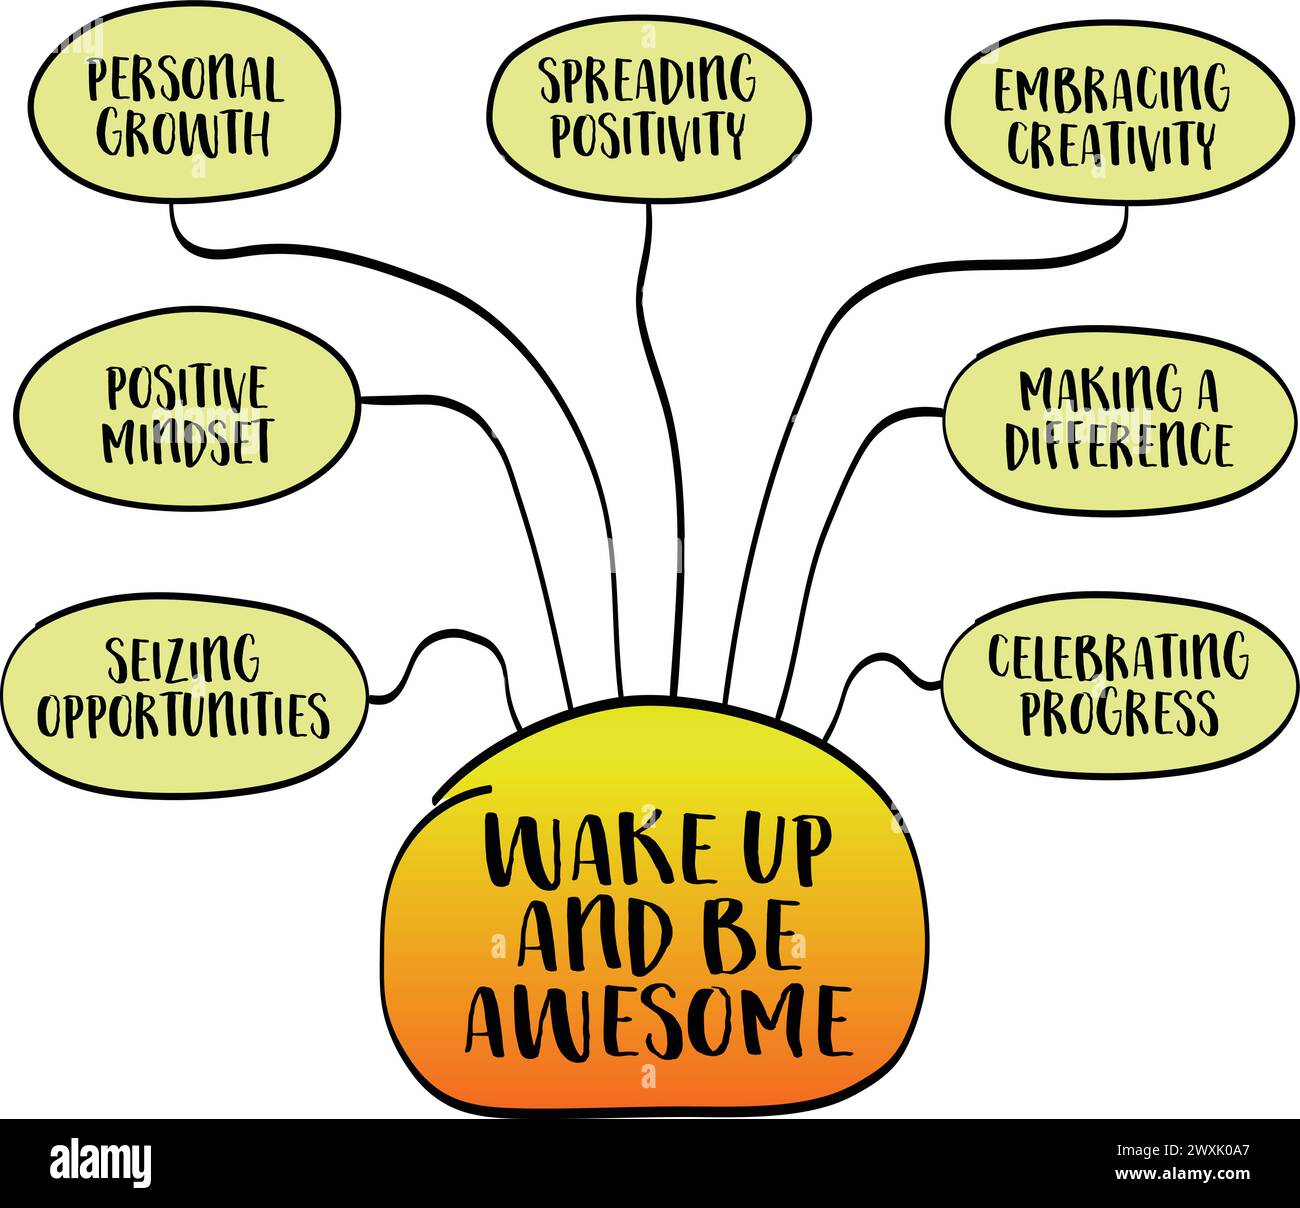 Wake up and be awesome concept encapsulates the idea of embracing each day with enthusiasm, purpose, and a positive mindset, vector sketch. Stock Vector